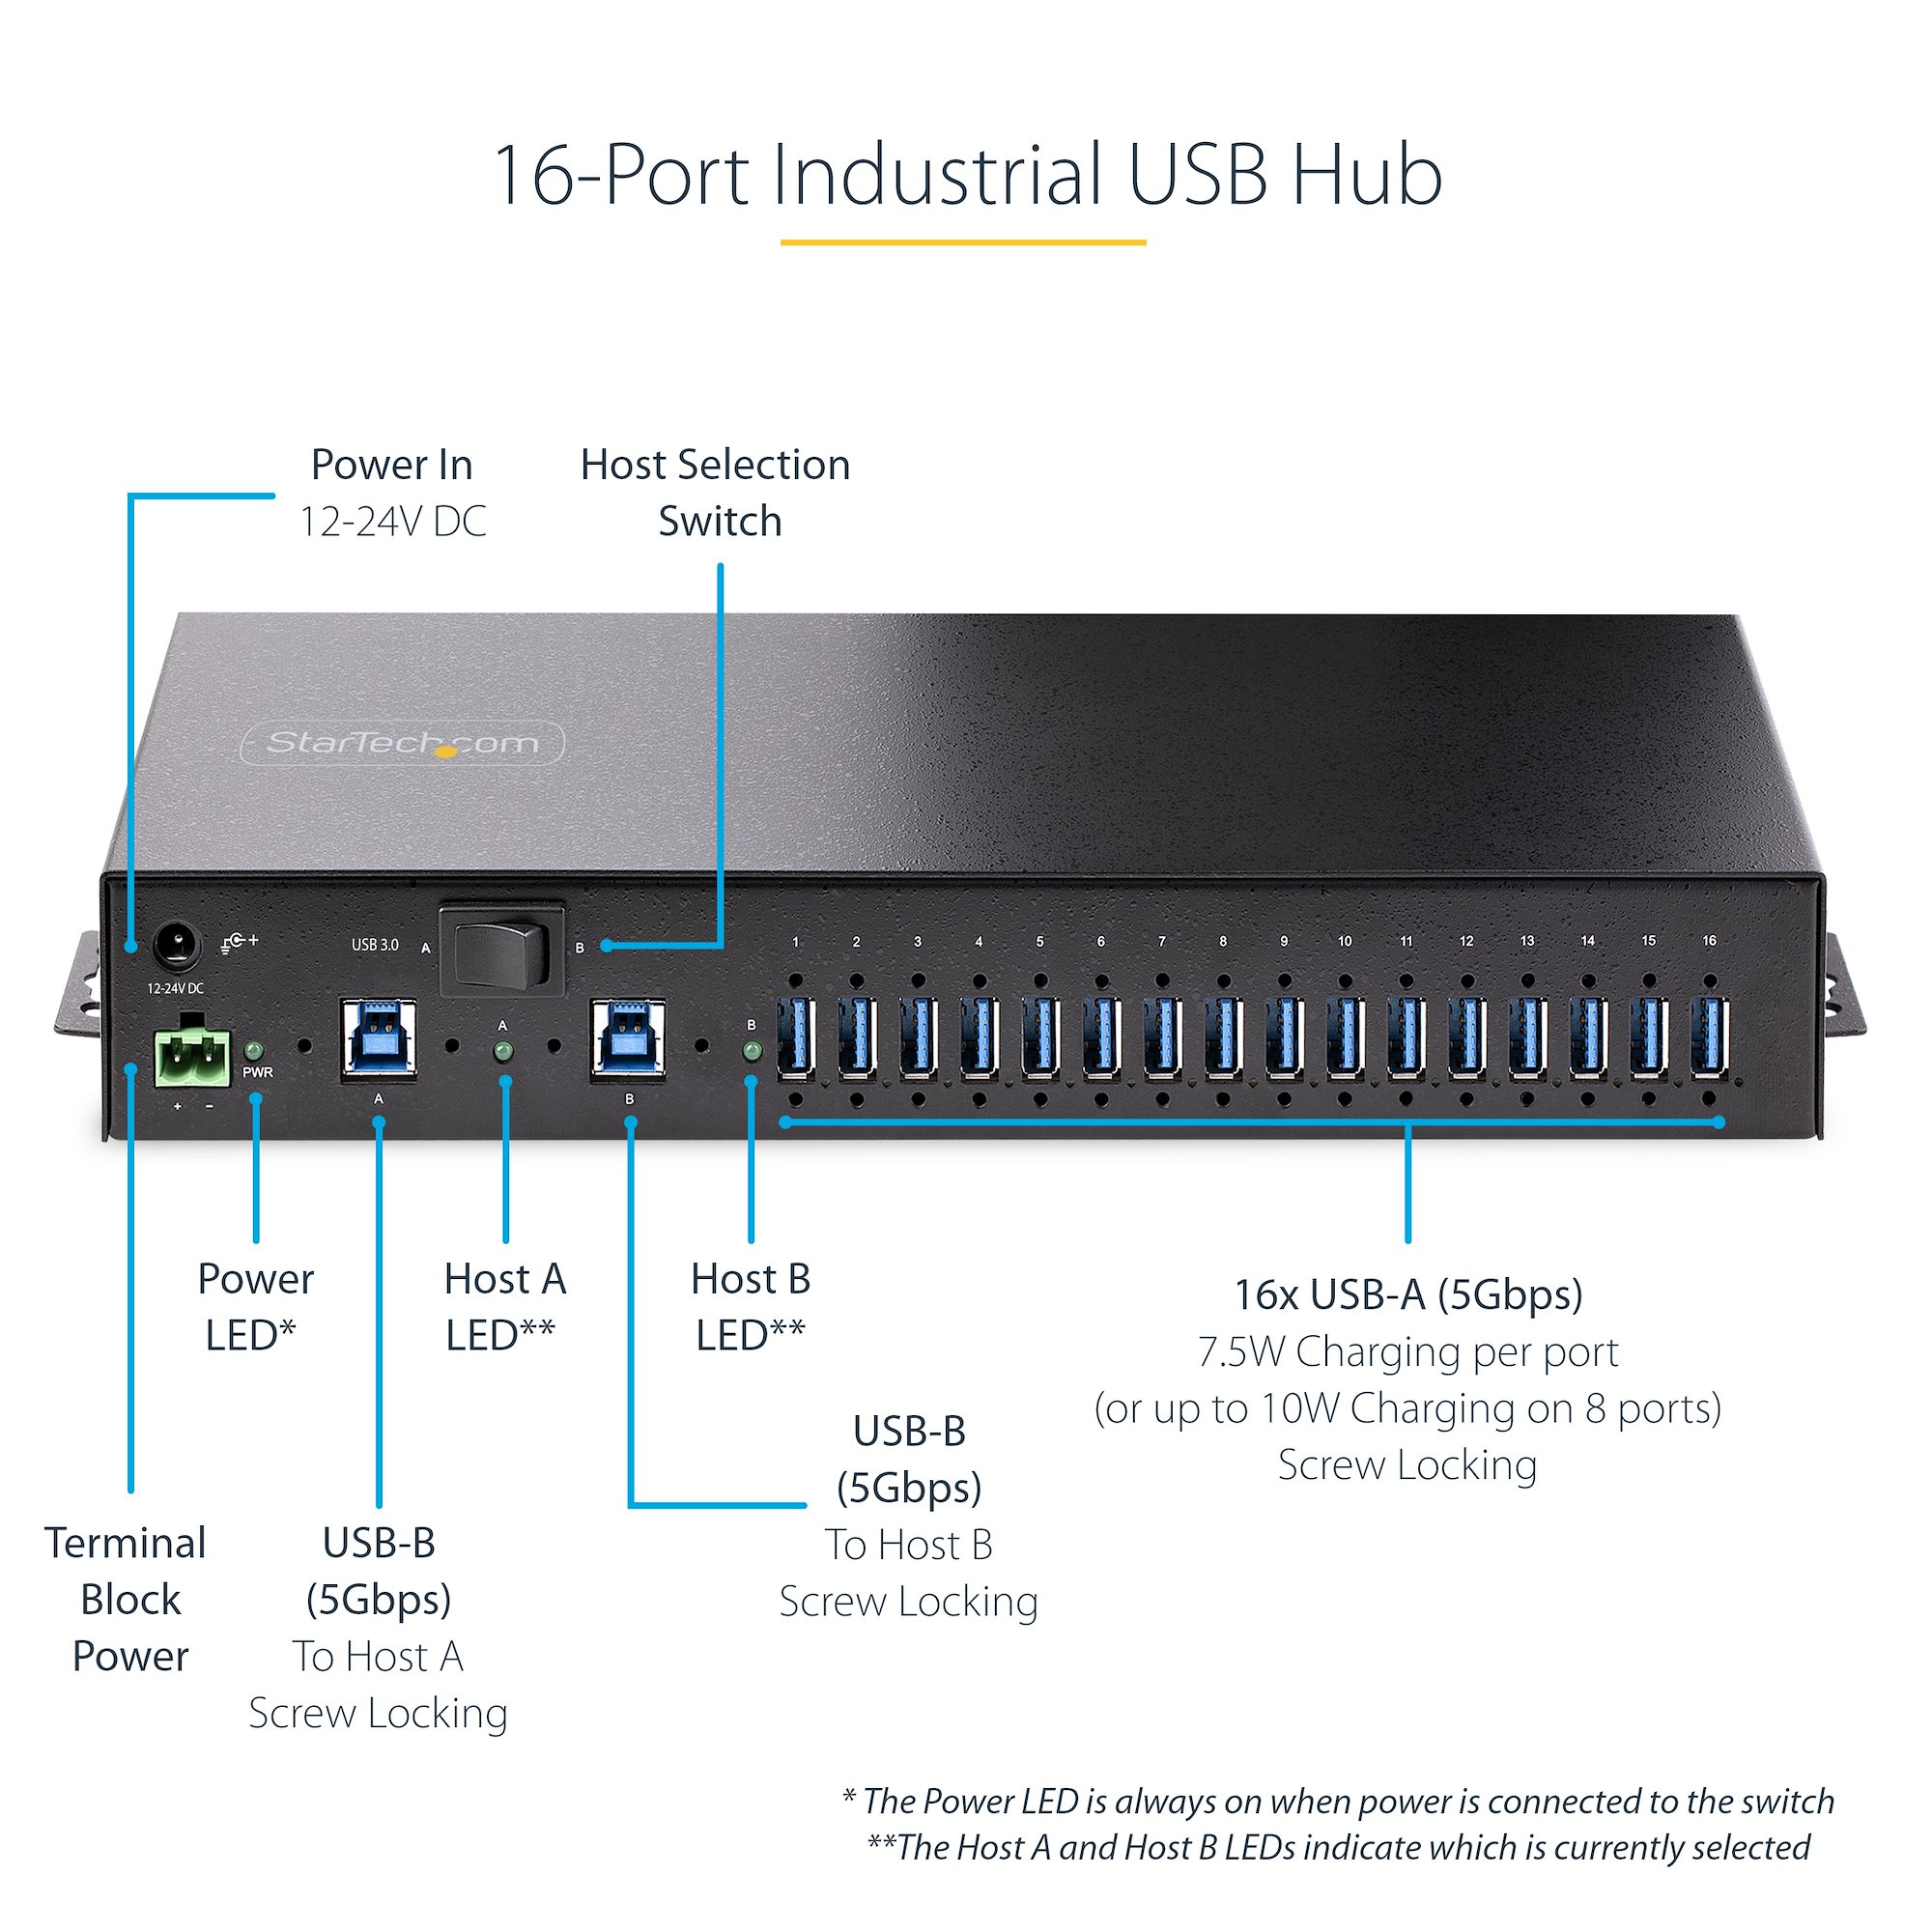 7-Port USB 3.2 Gen 1 Charging and SuperSpeed Mountable Data Hub